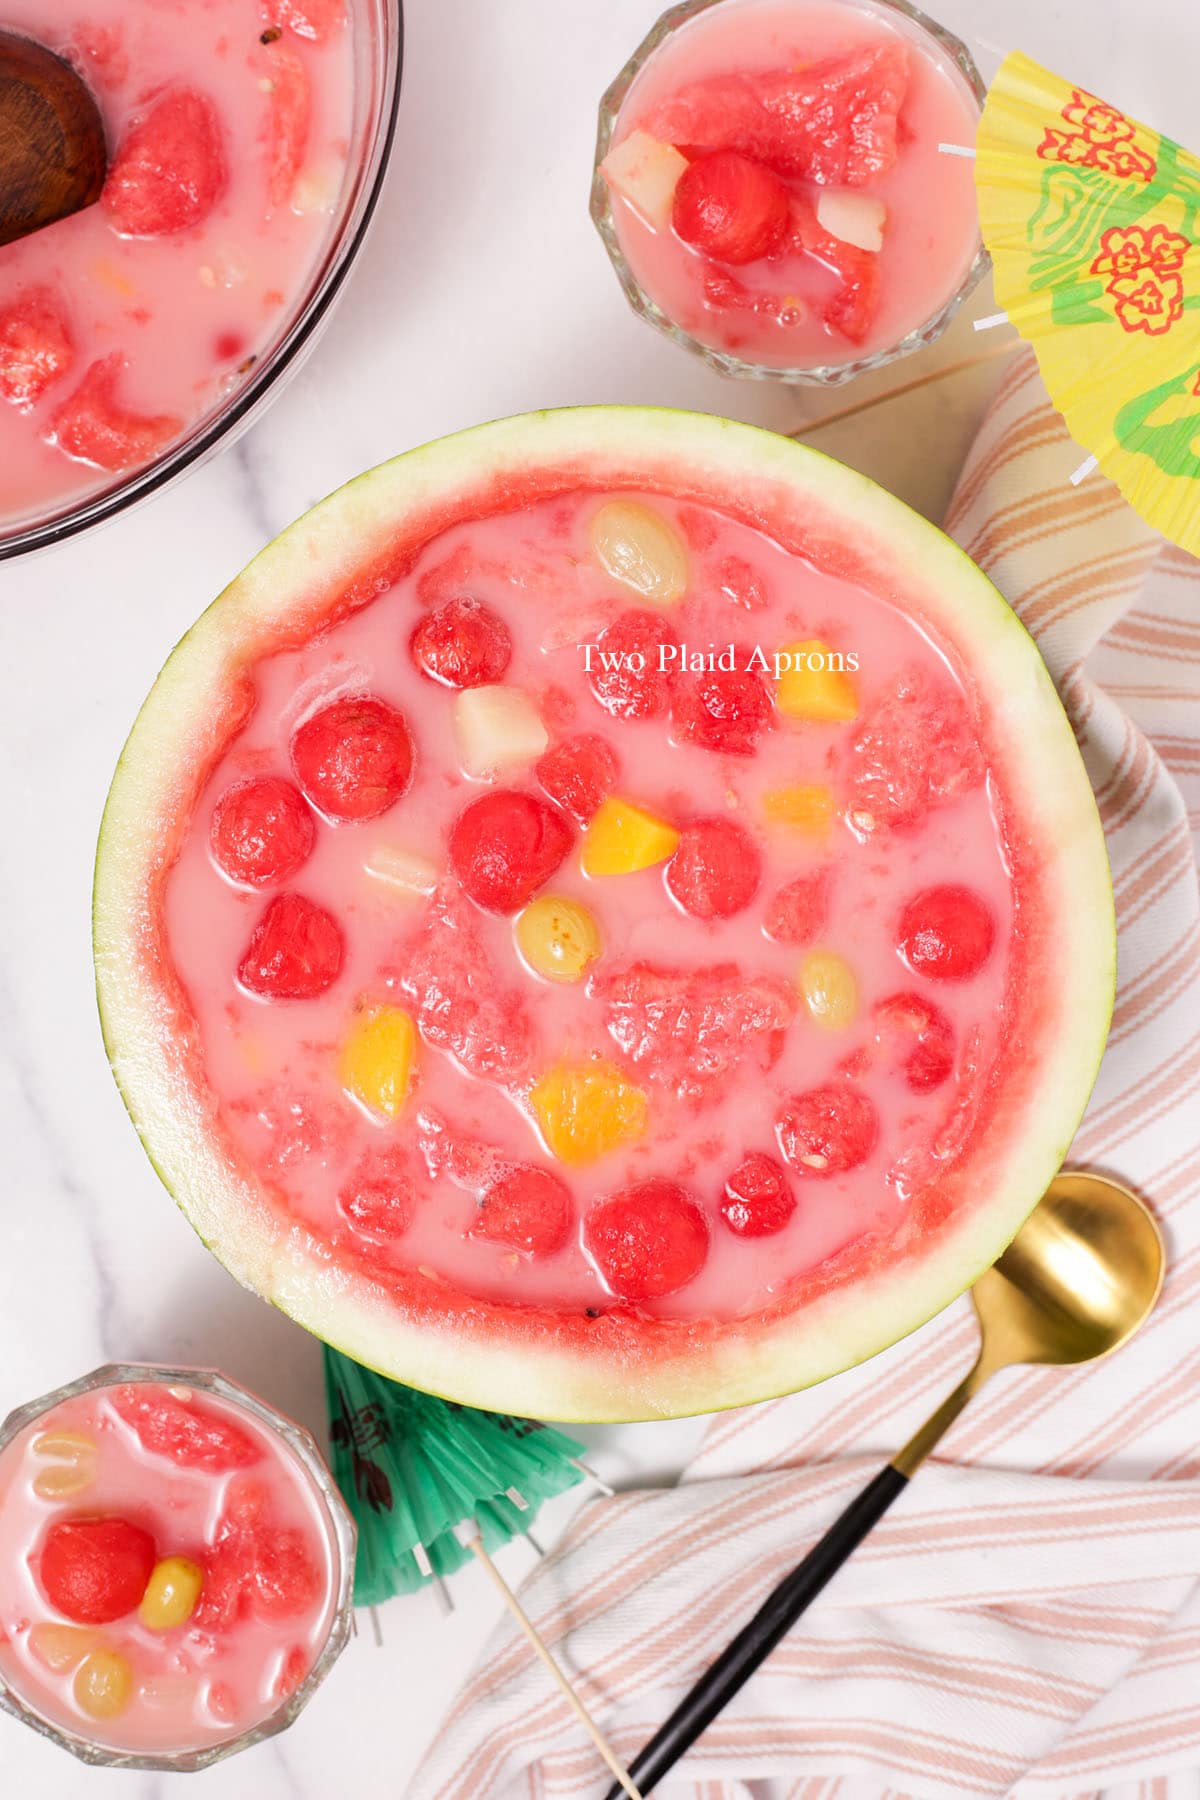 Hwachae - The Fruit Punch Extravaganza